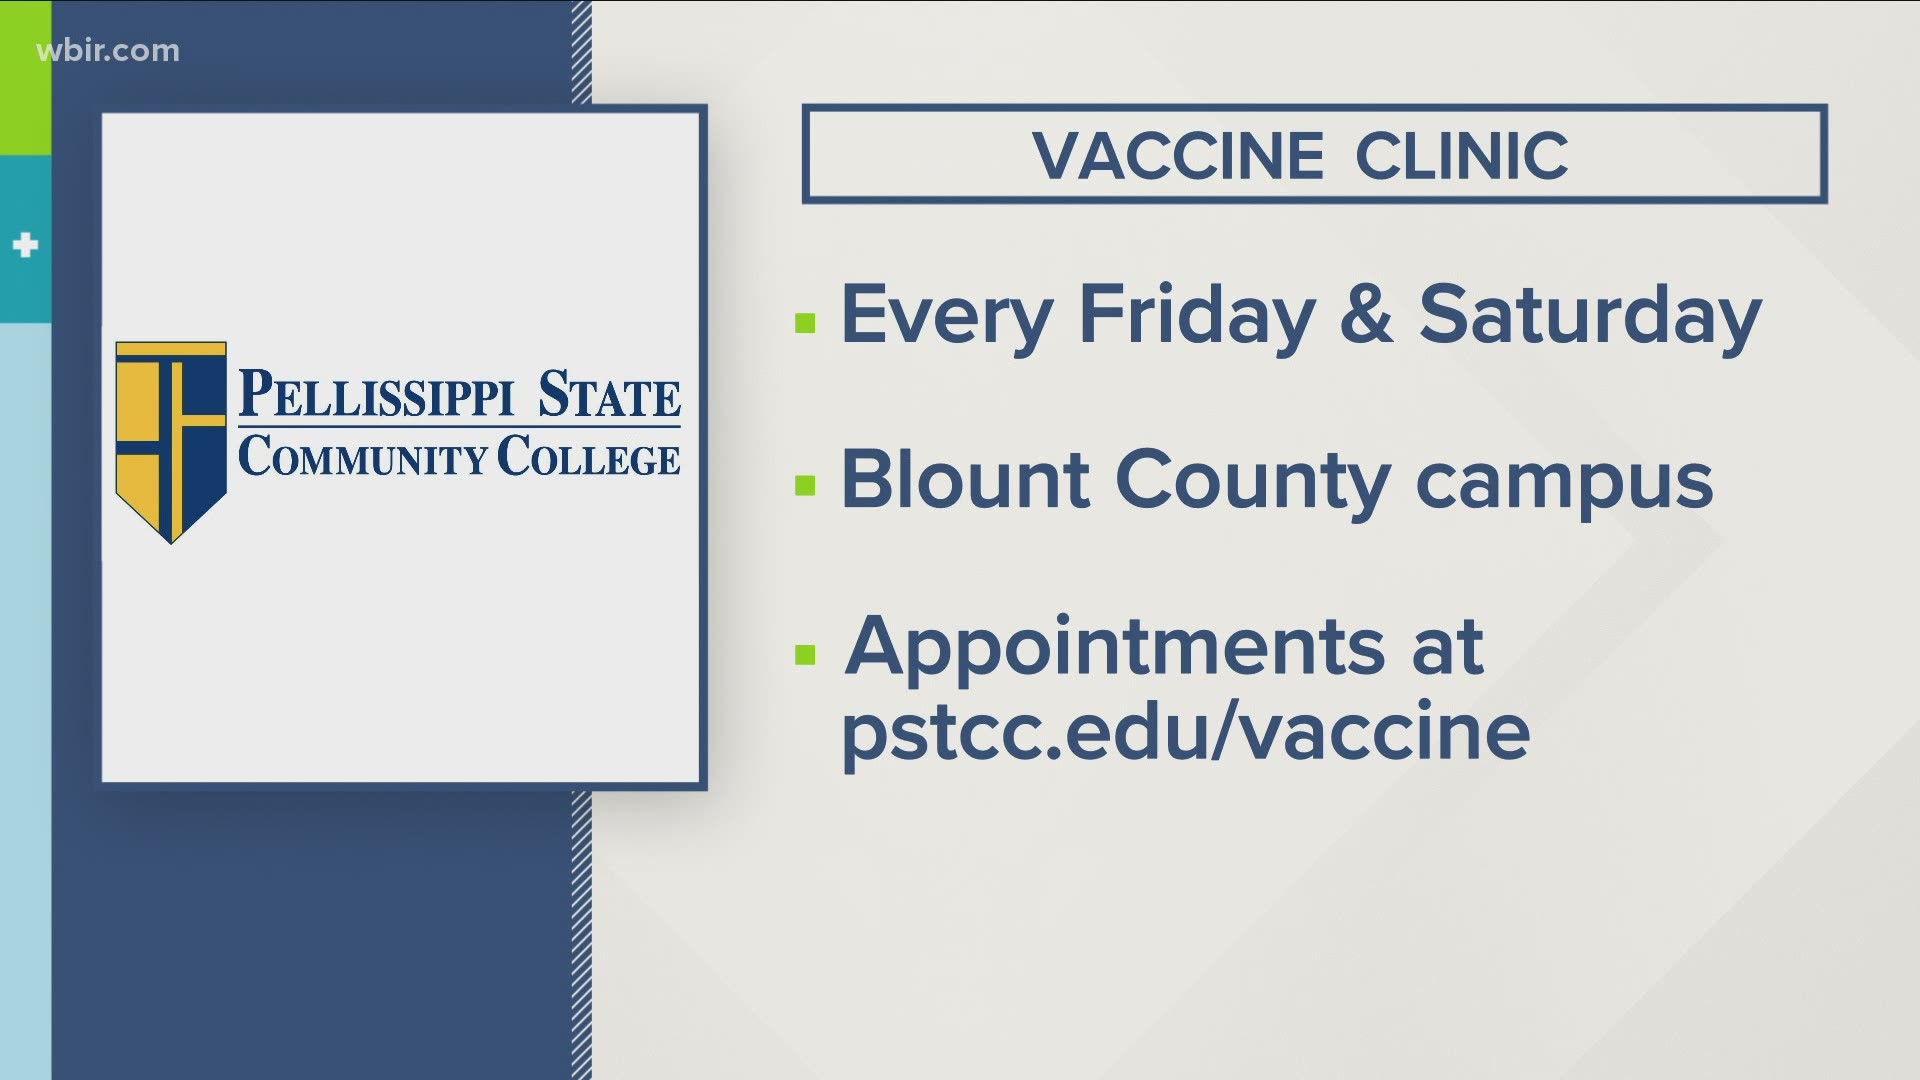 There are tons of opportunities to get the COVID-19 vaccine over the weekend!